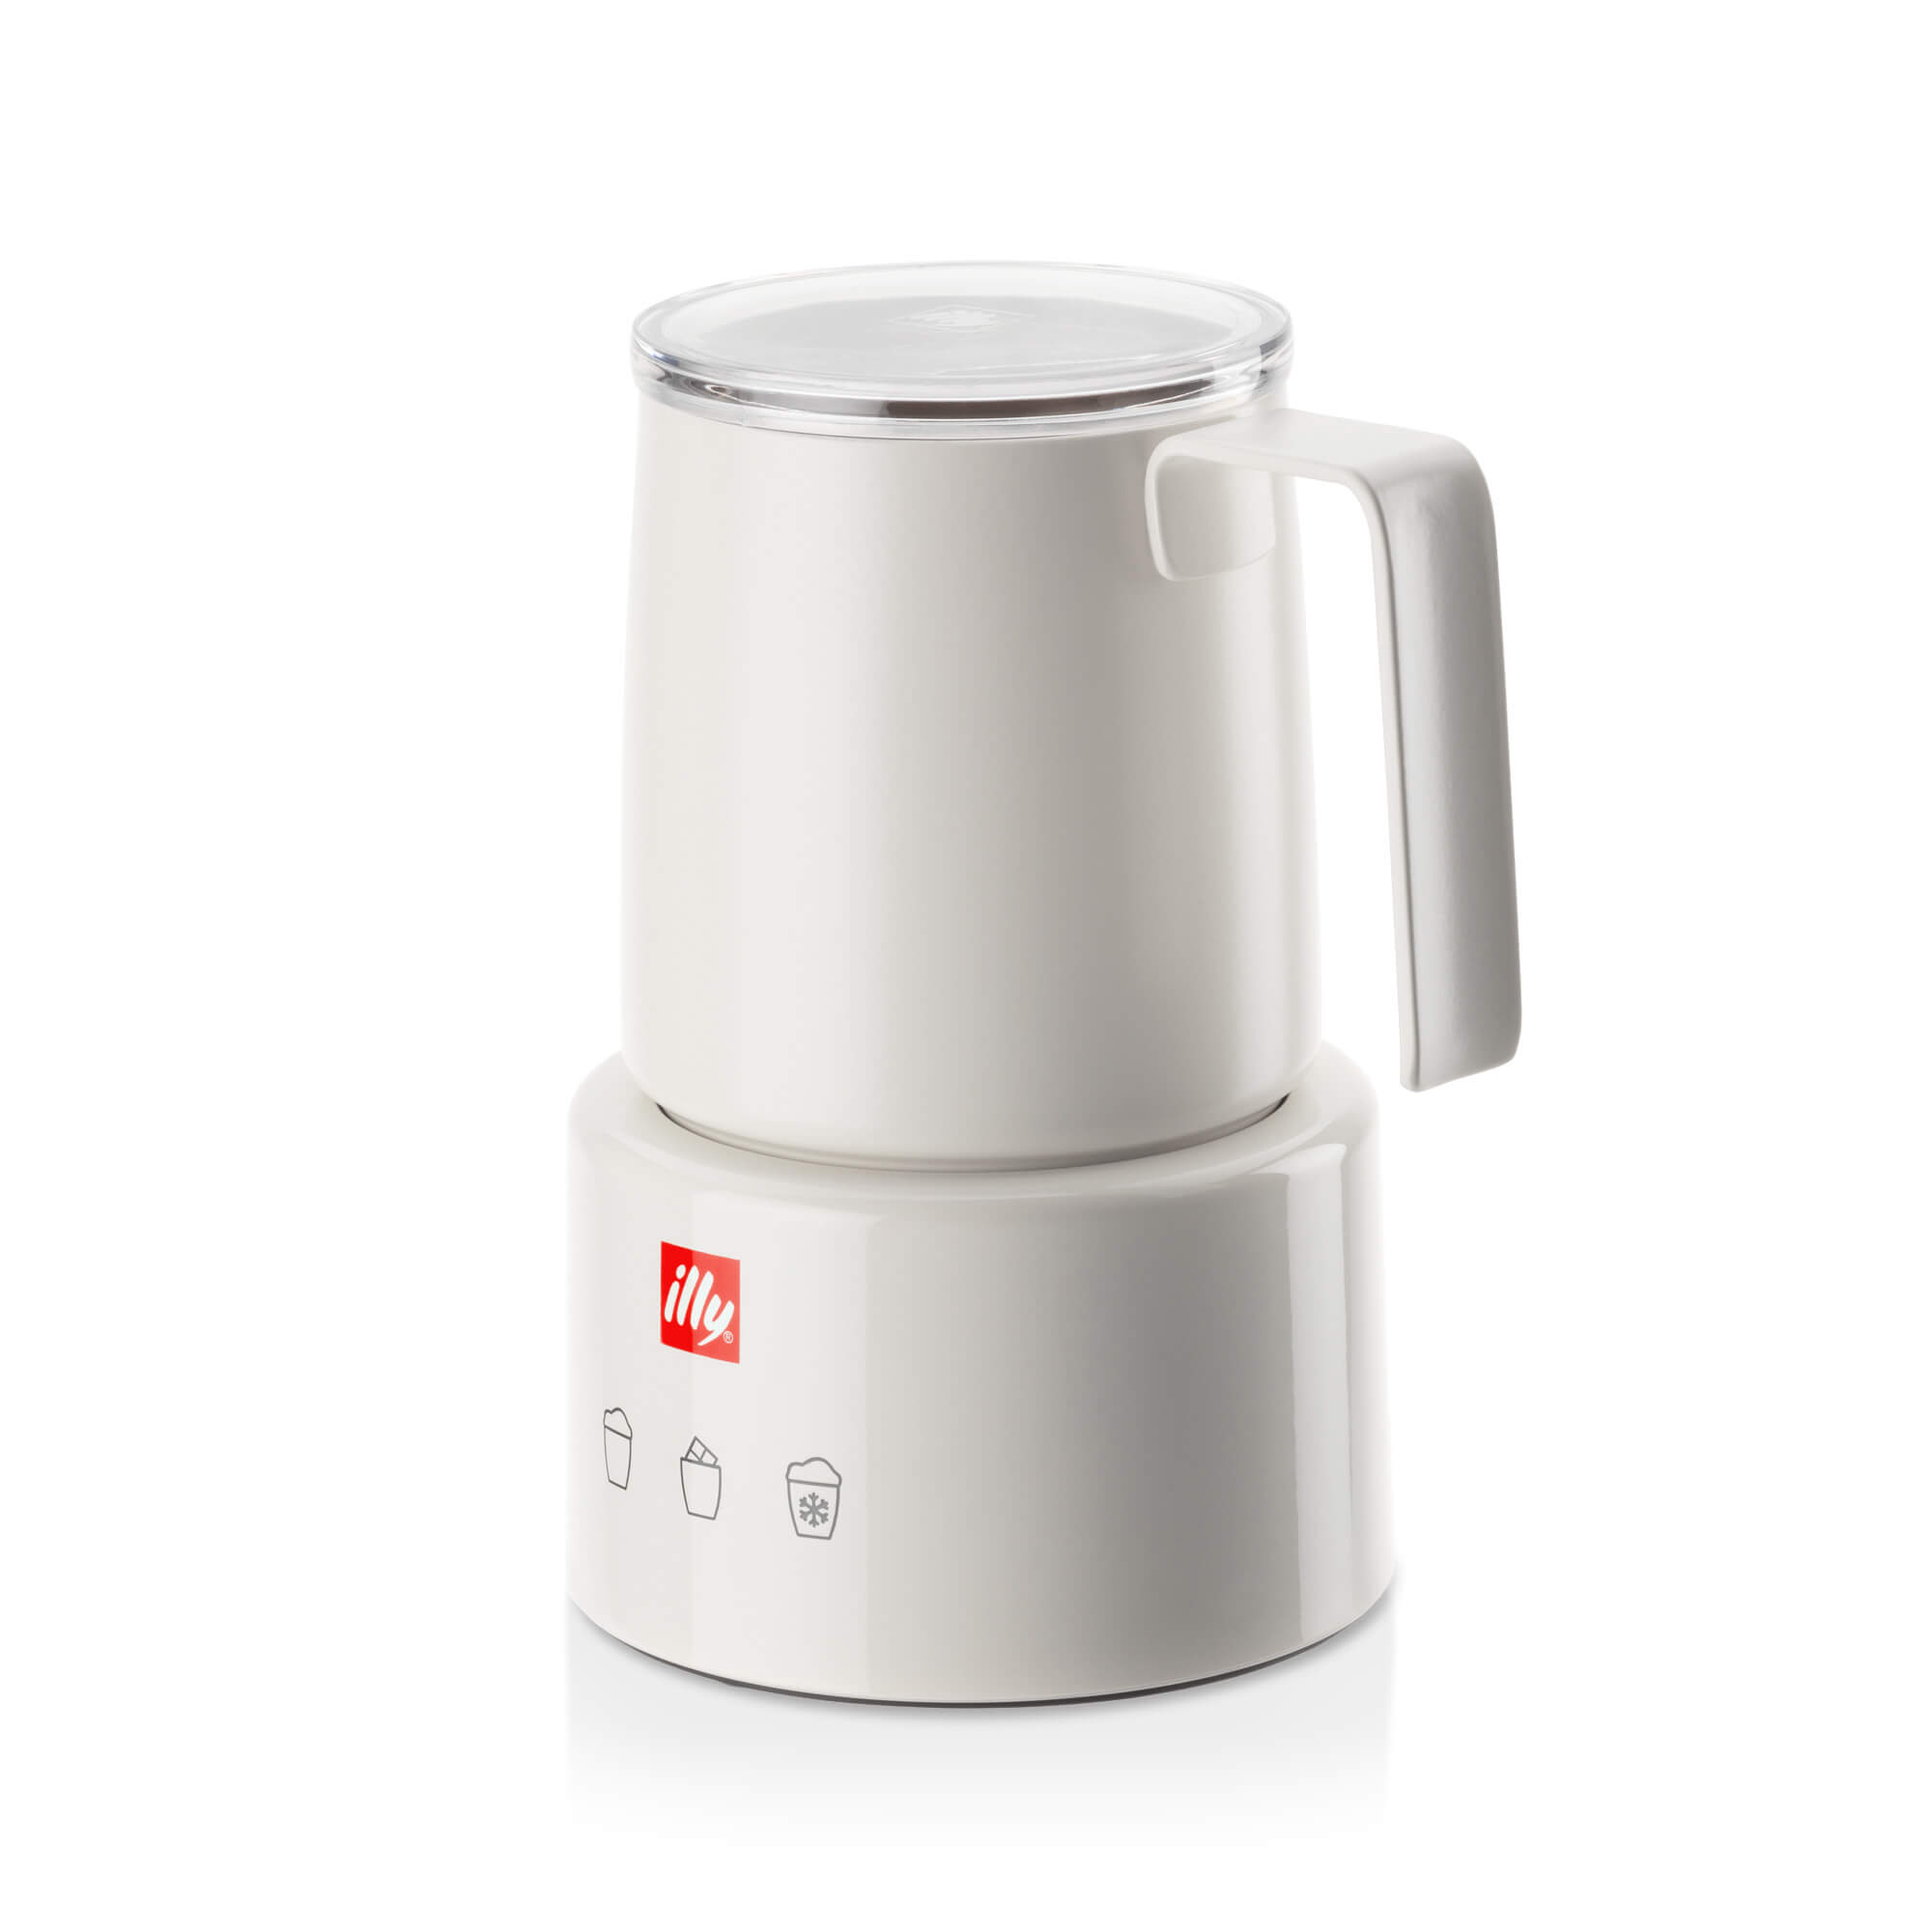 illy Electric Milk Frother Λευκό, Αξεσουάρ Καφέ, 02-07-0102